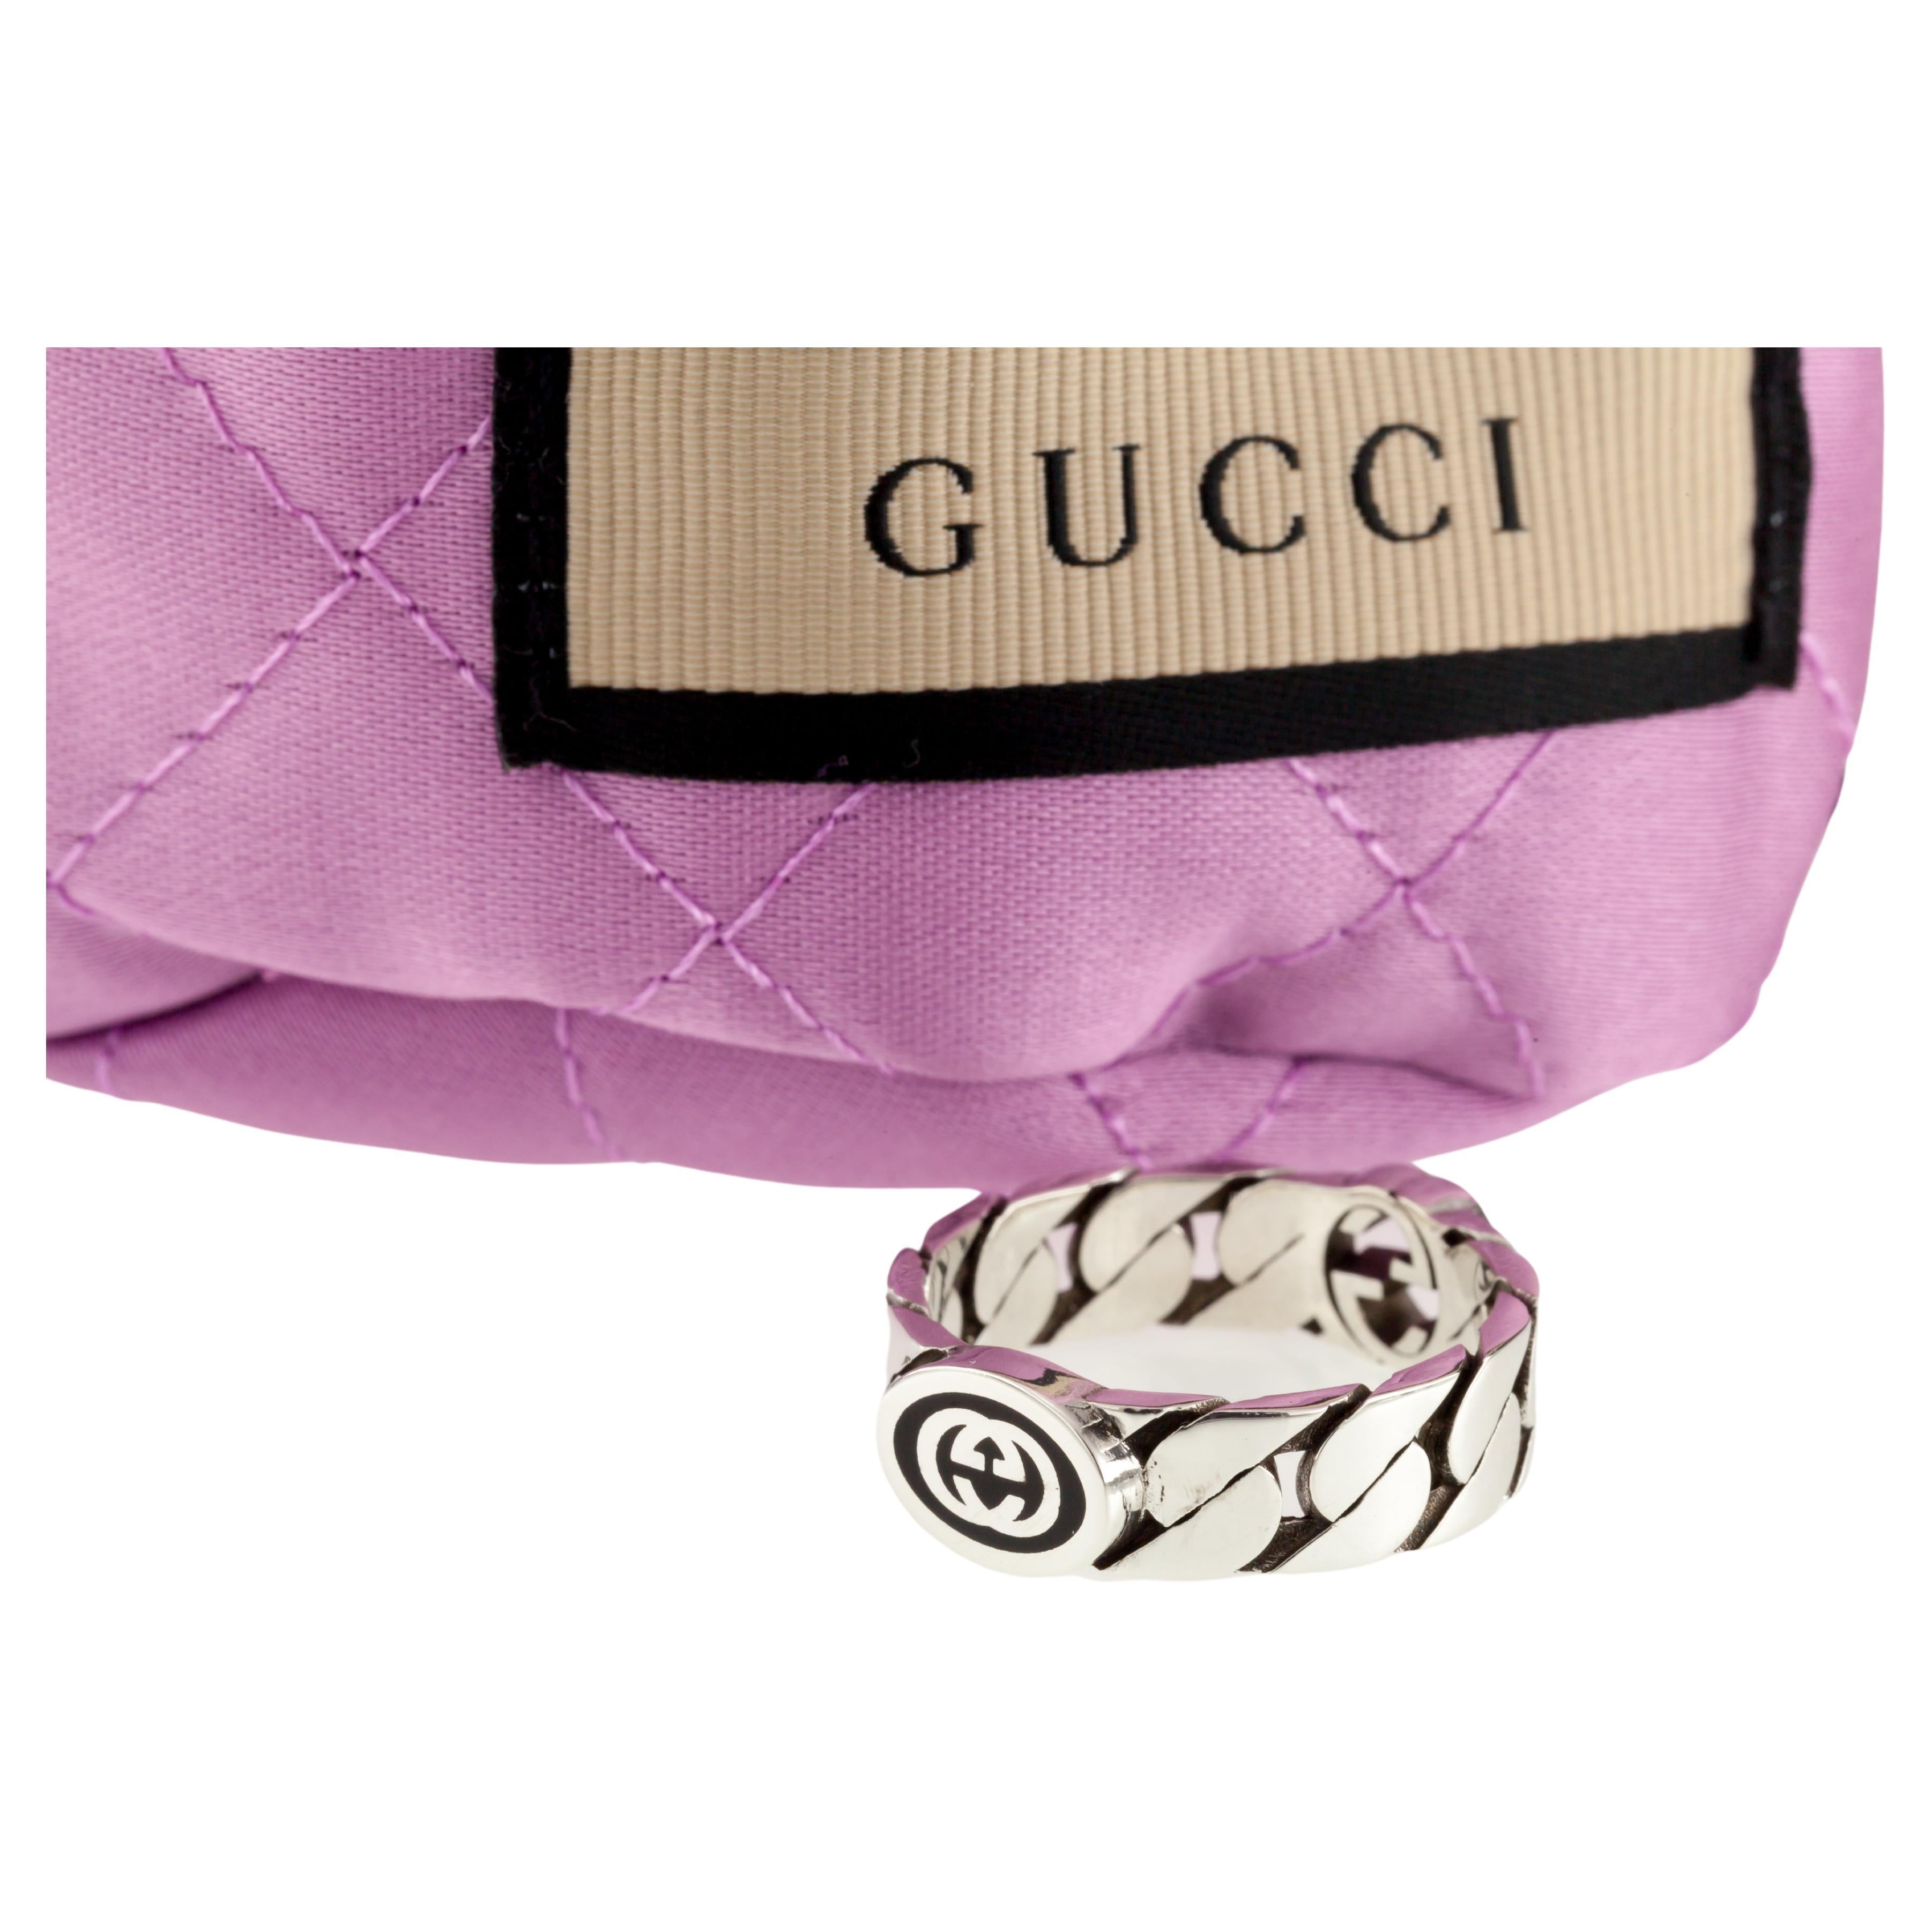 Authentic GUCCI GG Marmont Key Case Leather Pink 6 key Loops Box Storage  Bag